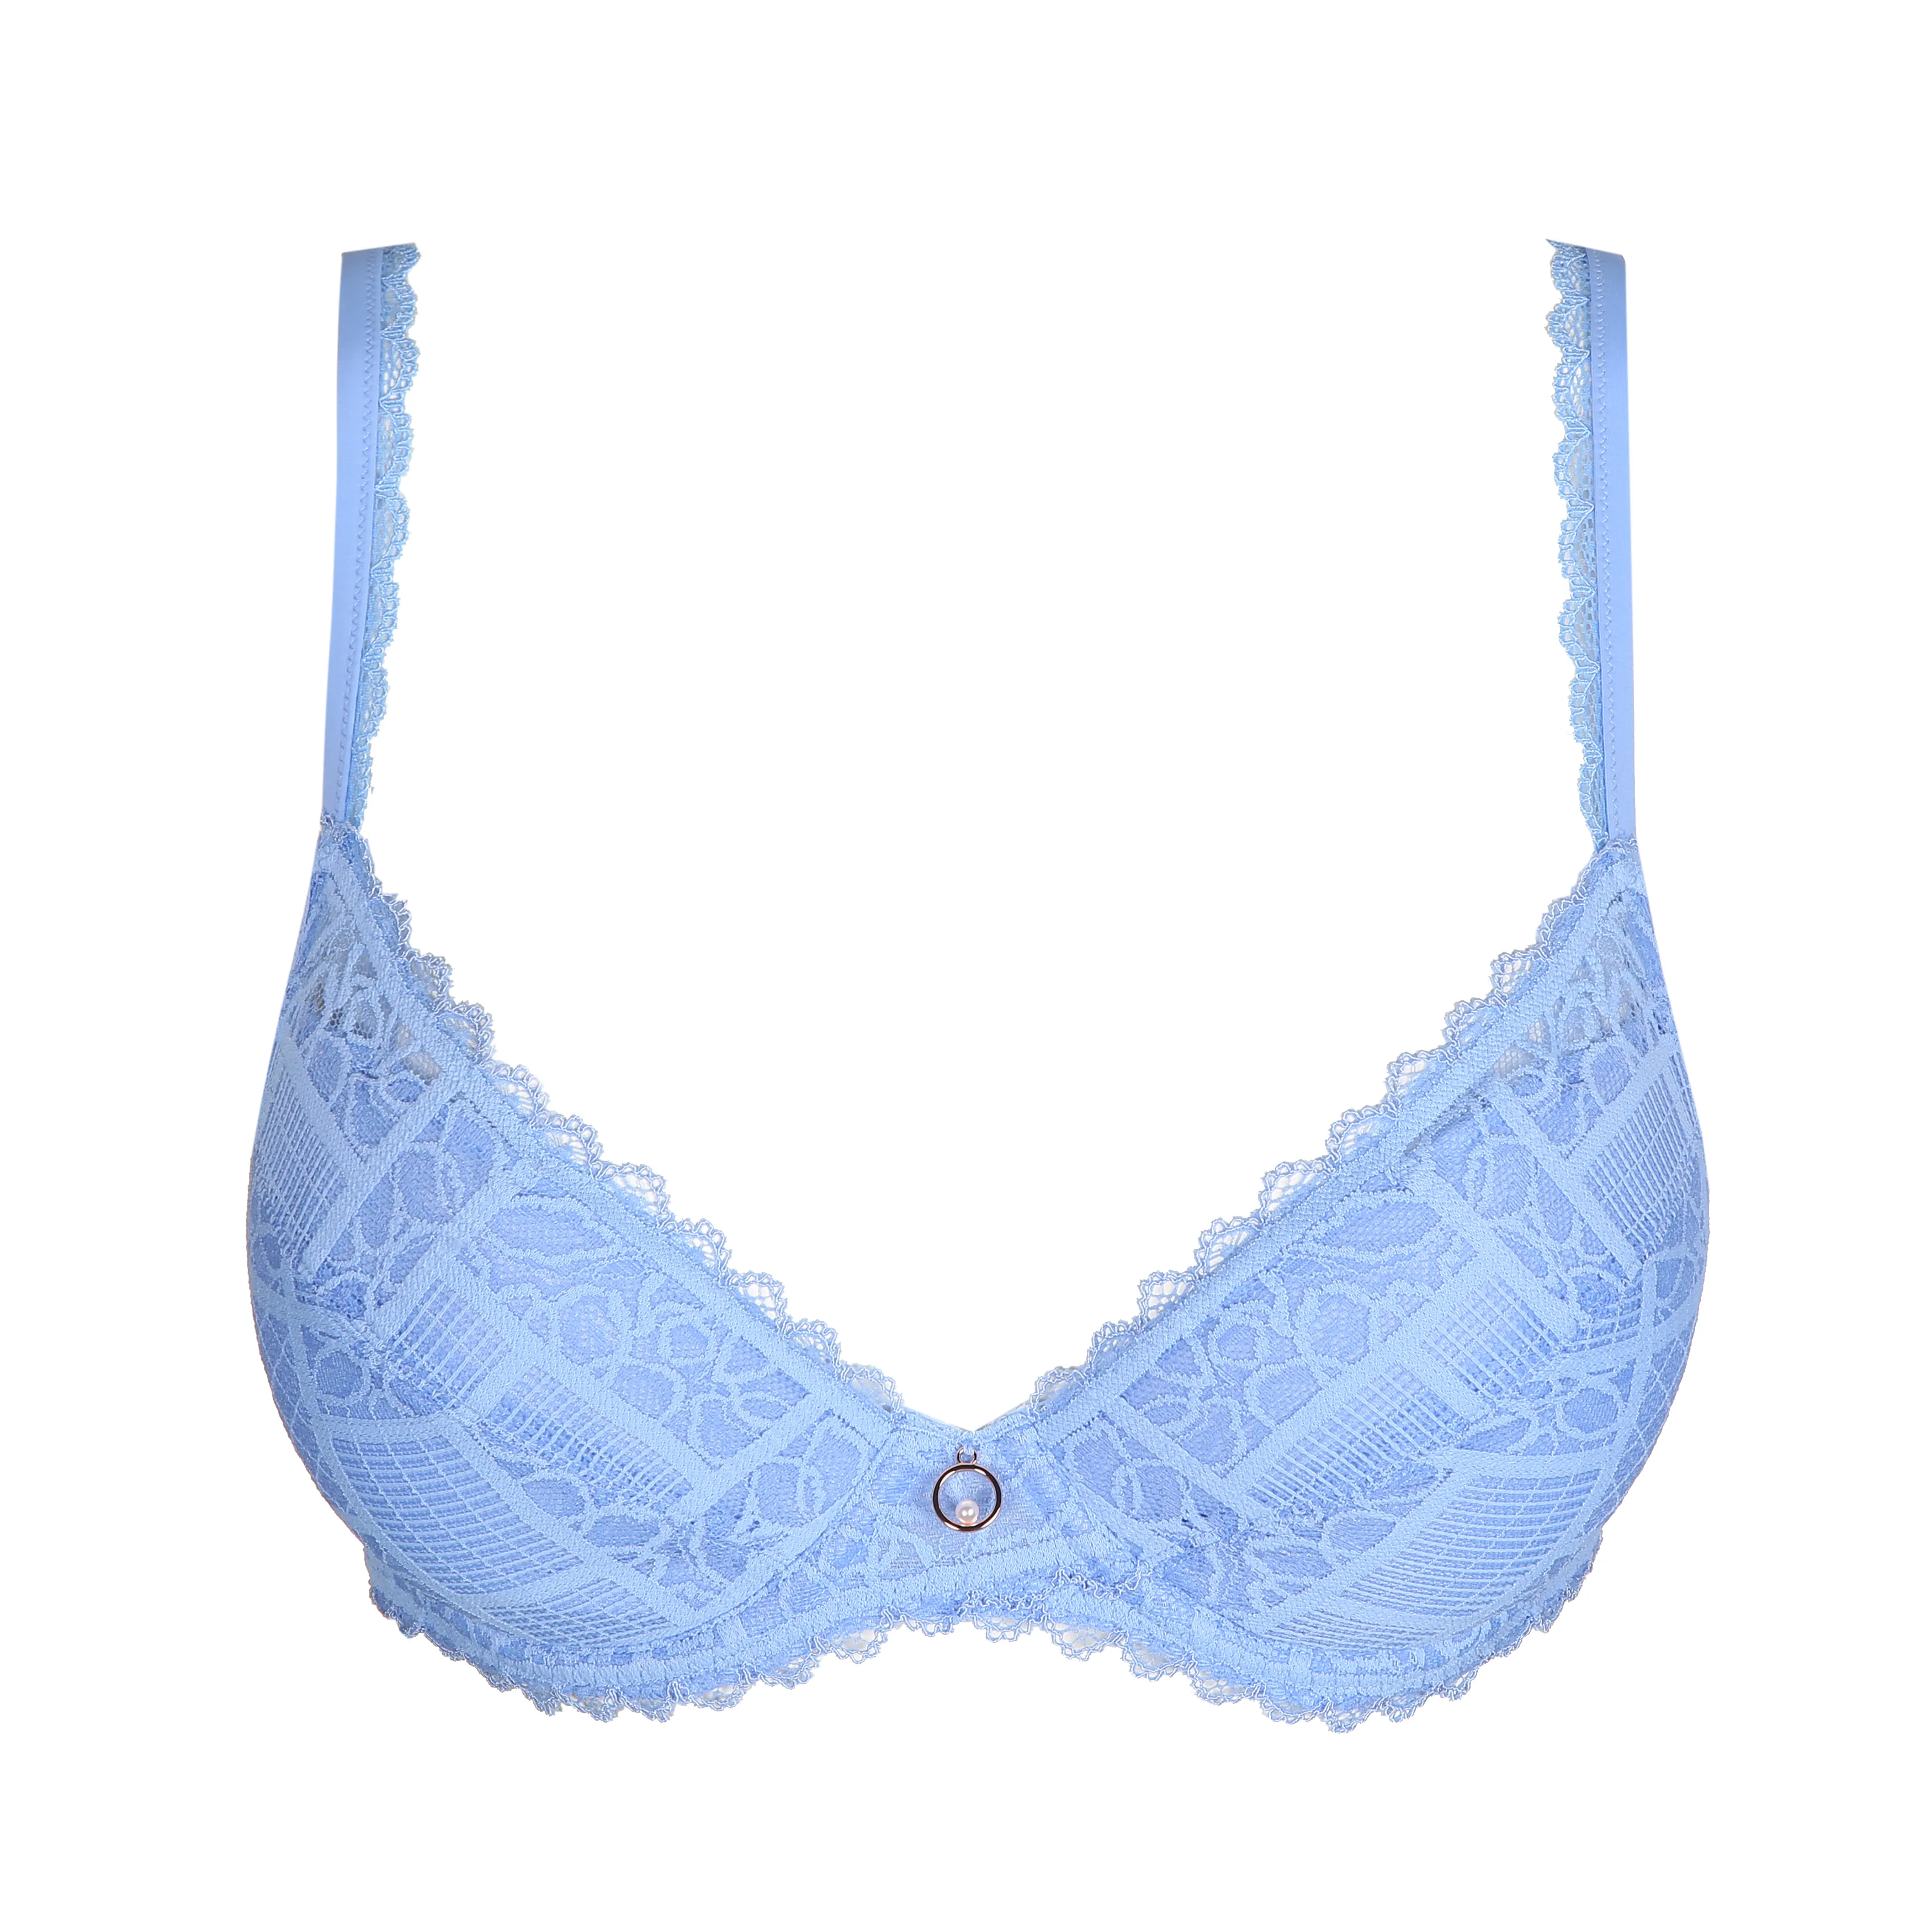 Marie Jo JADEI open air push-up bra removable pads